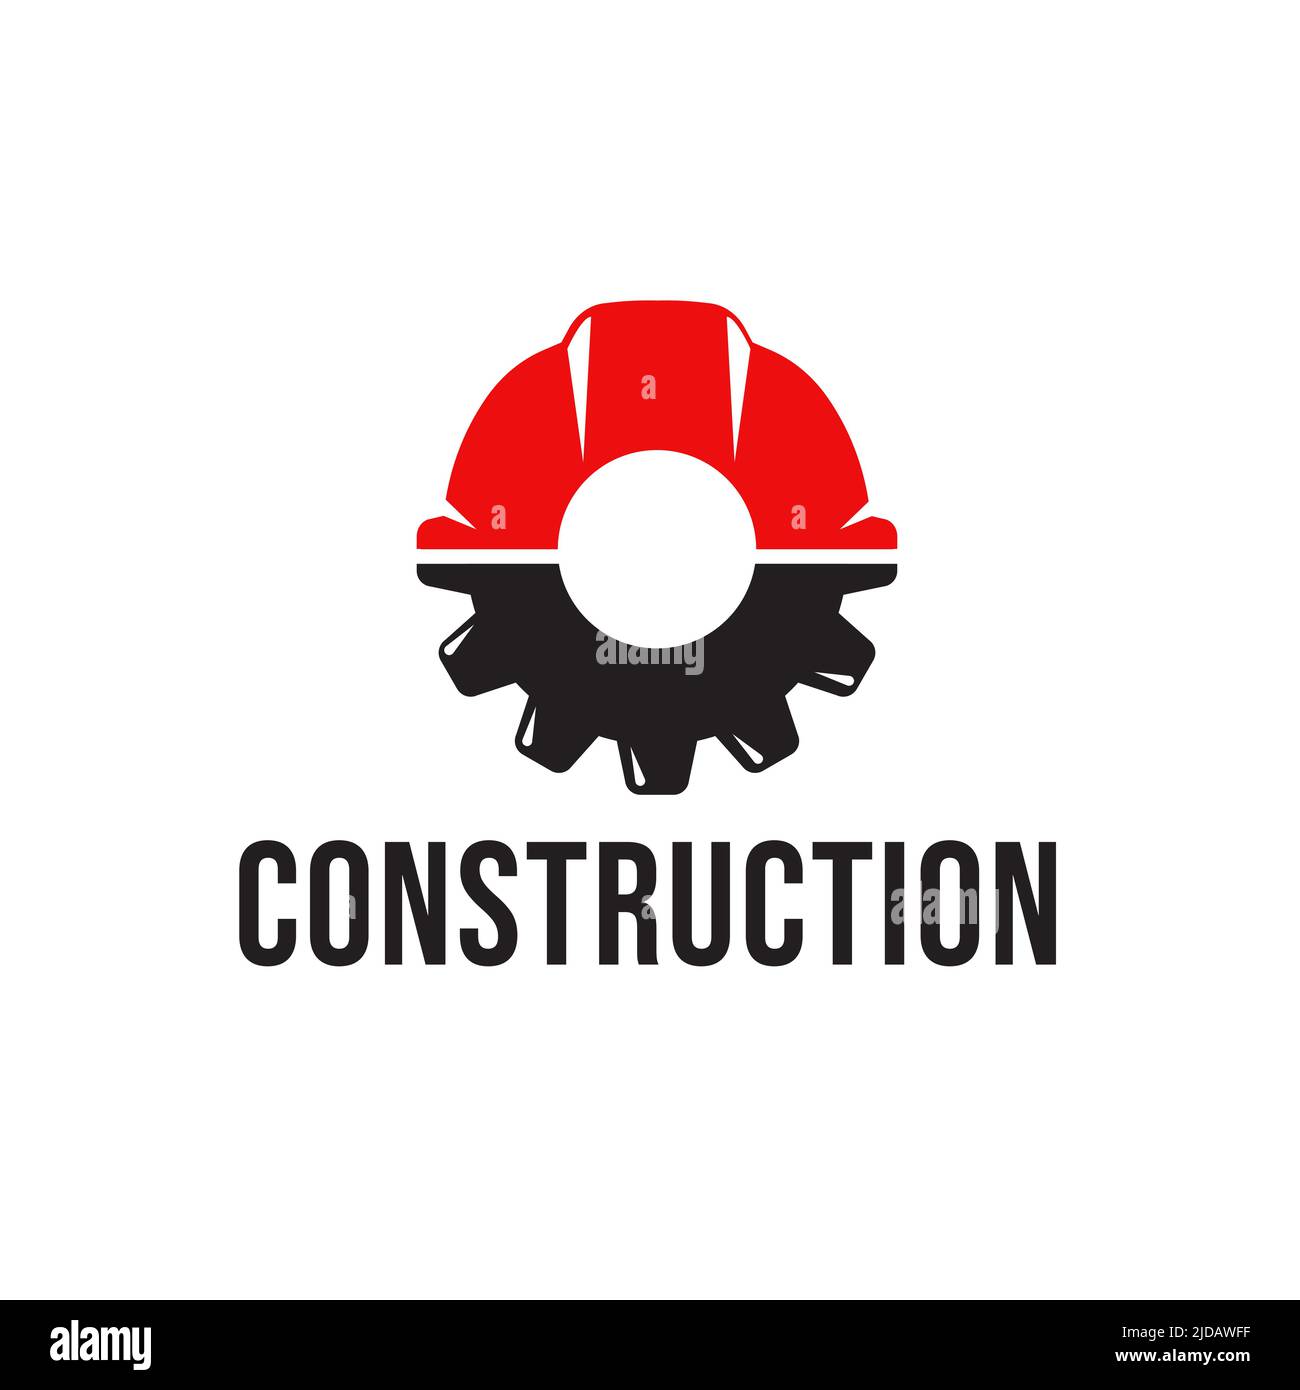 Red Construction Helmet with Gear icon vector simple design Stock Vector